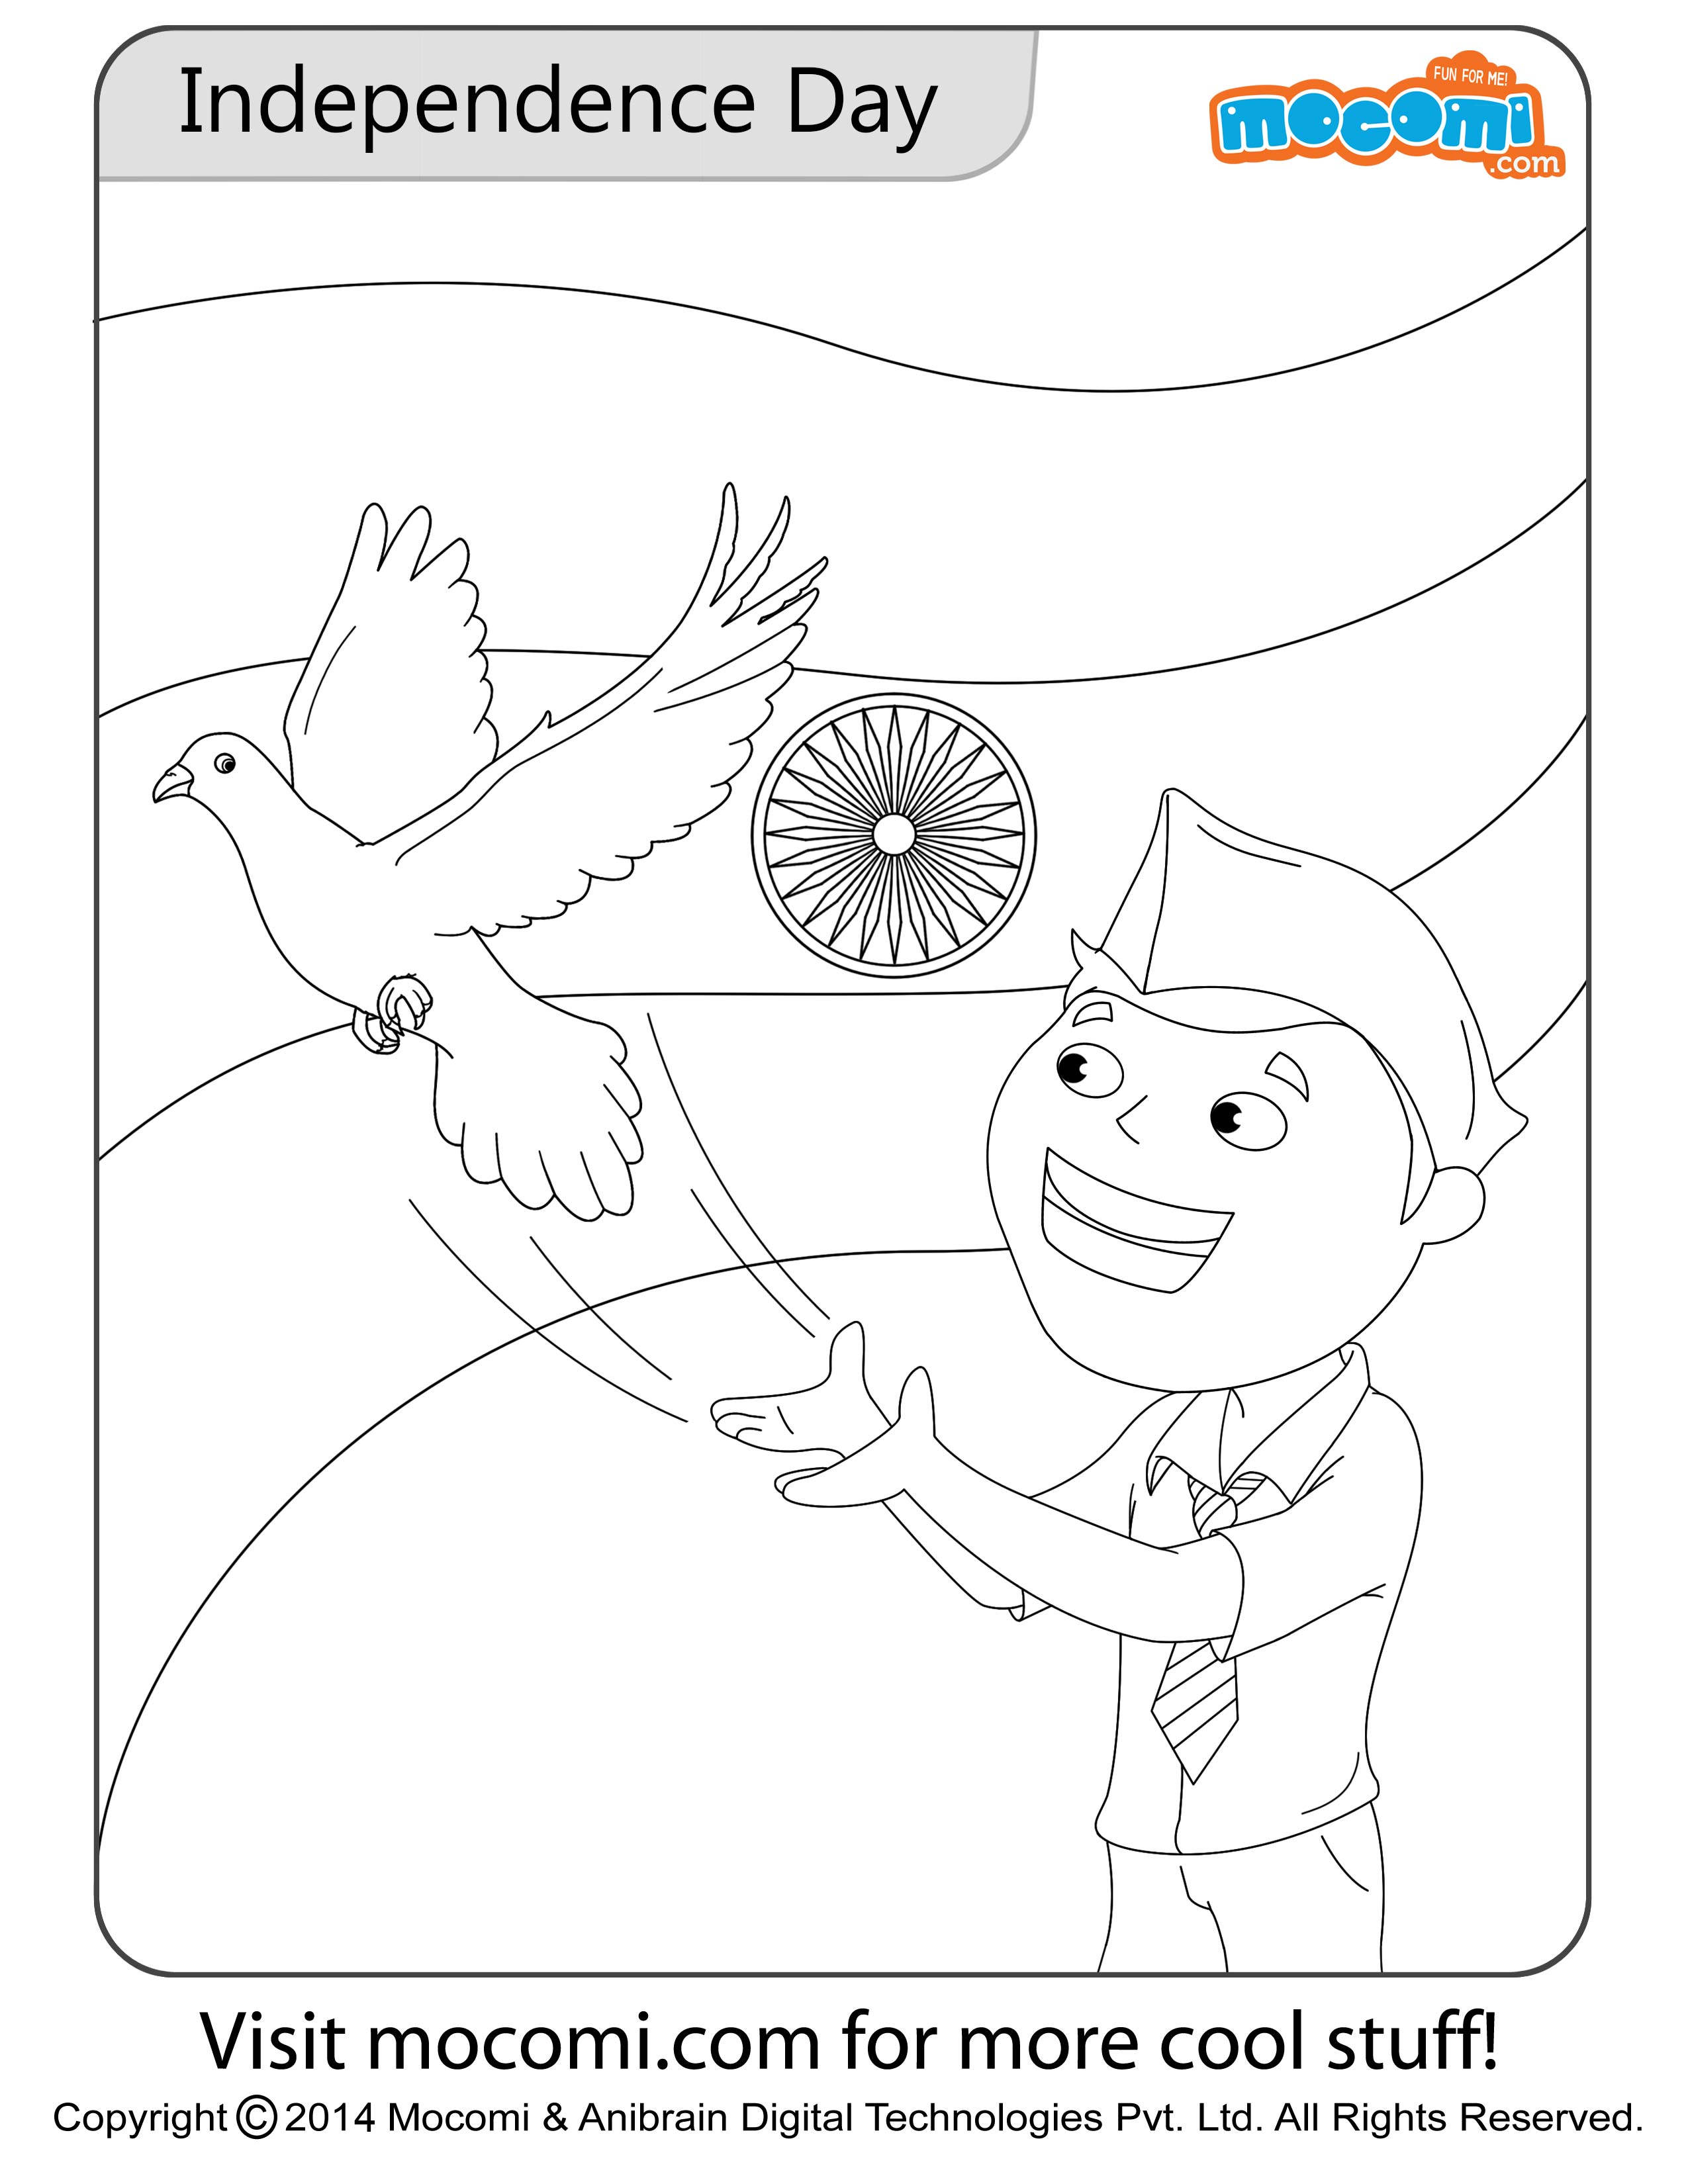 Independence day colouring page